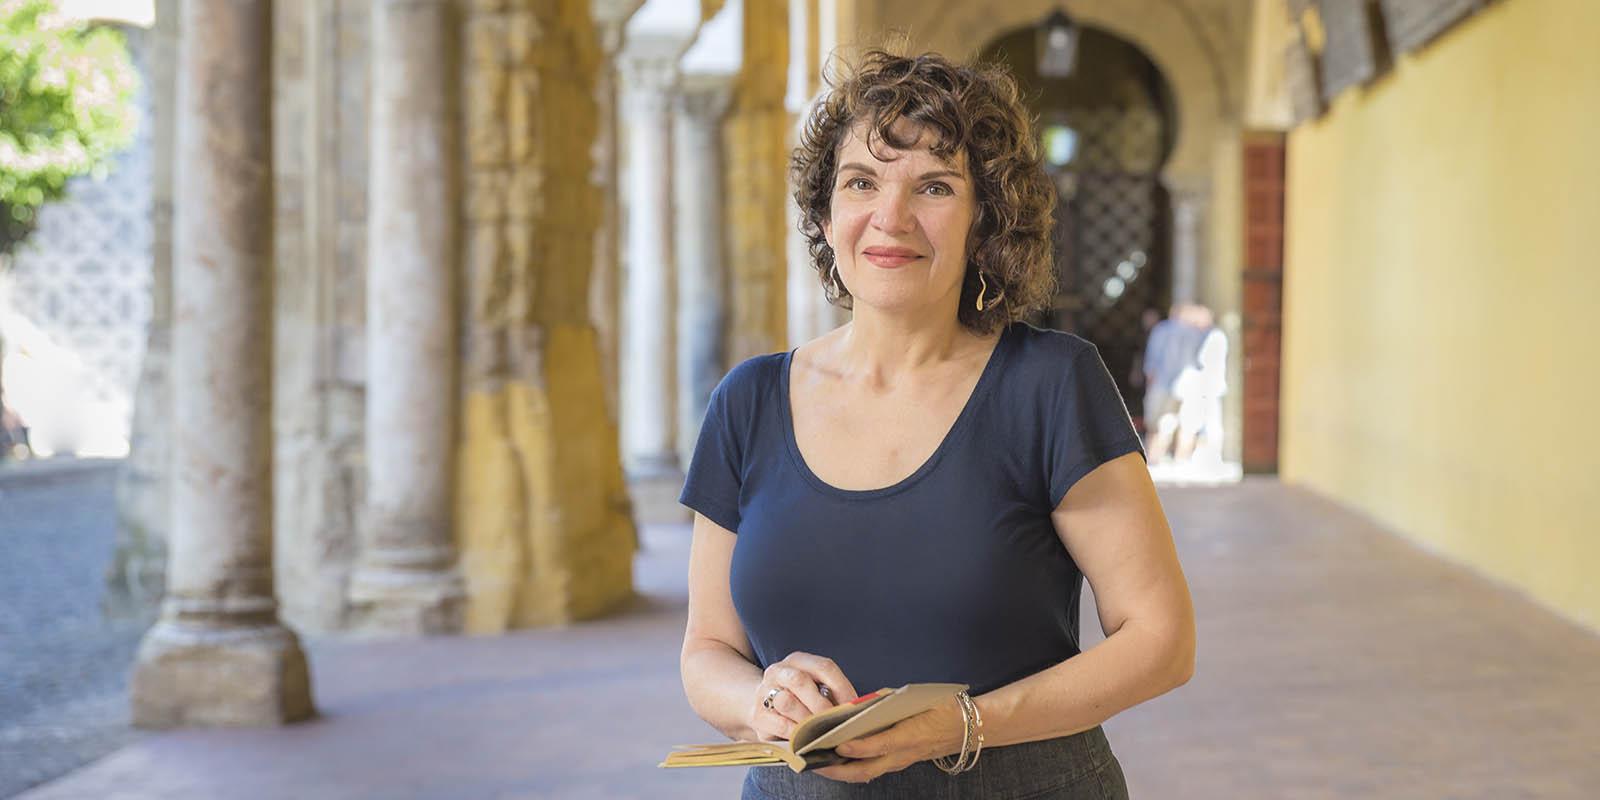 Click for more information about Michele Lamprakos Awarded National Endowment for the Humanities Fellowship